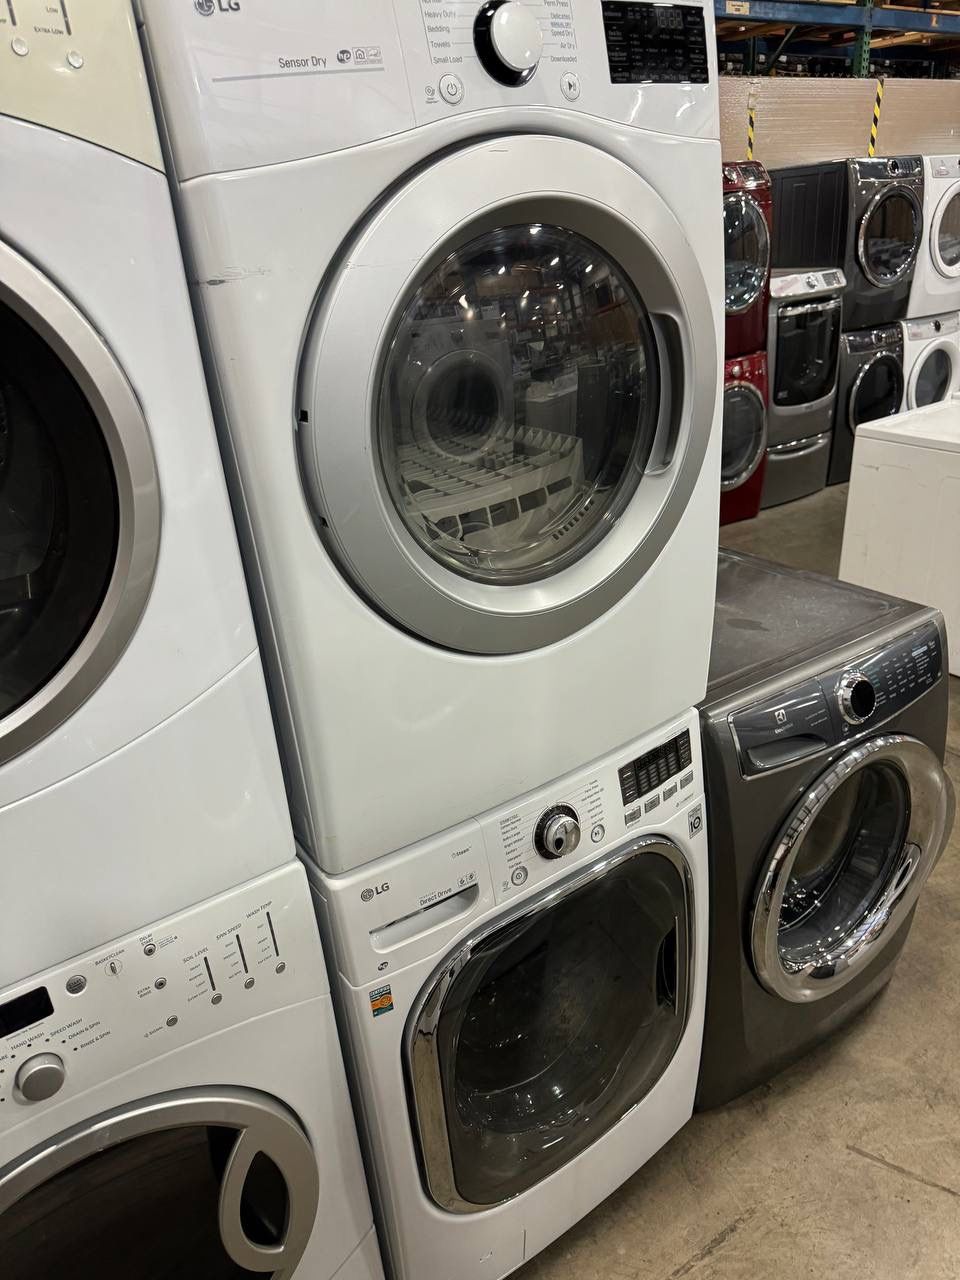 LG Washer $ Dryer Electric Stackable Set Free Attachments Warranty 